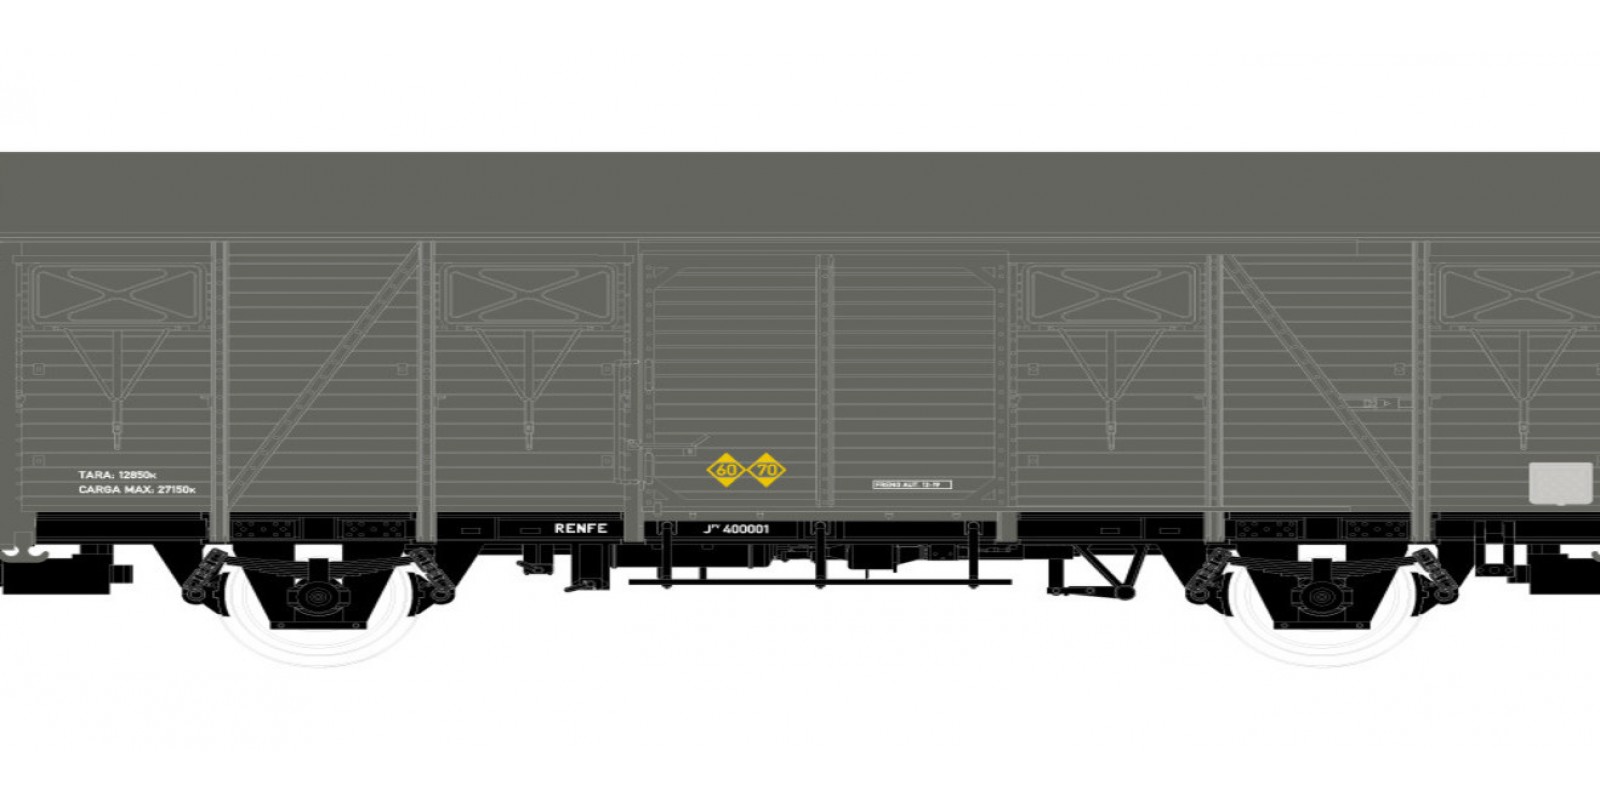 ET19045 2-axle wagon ORE, with wooden walls, "CAF" livery, period III